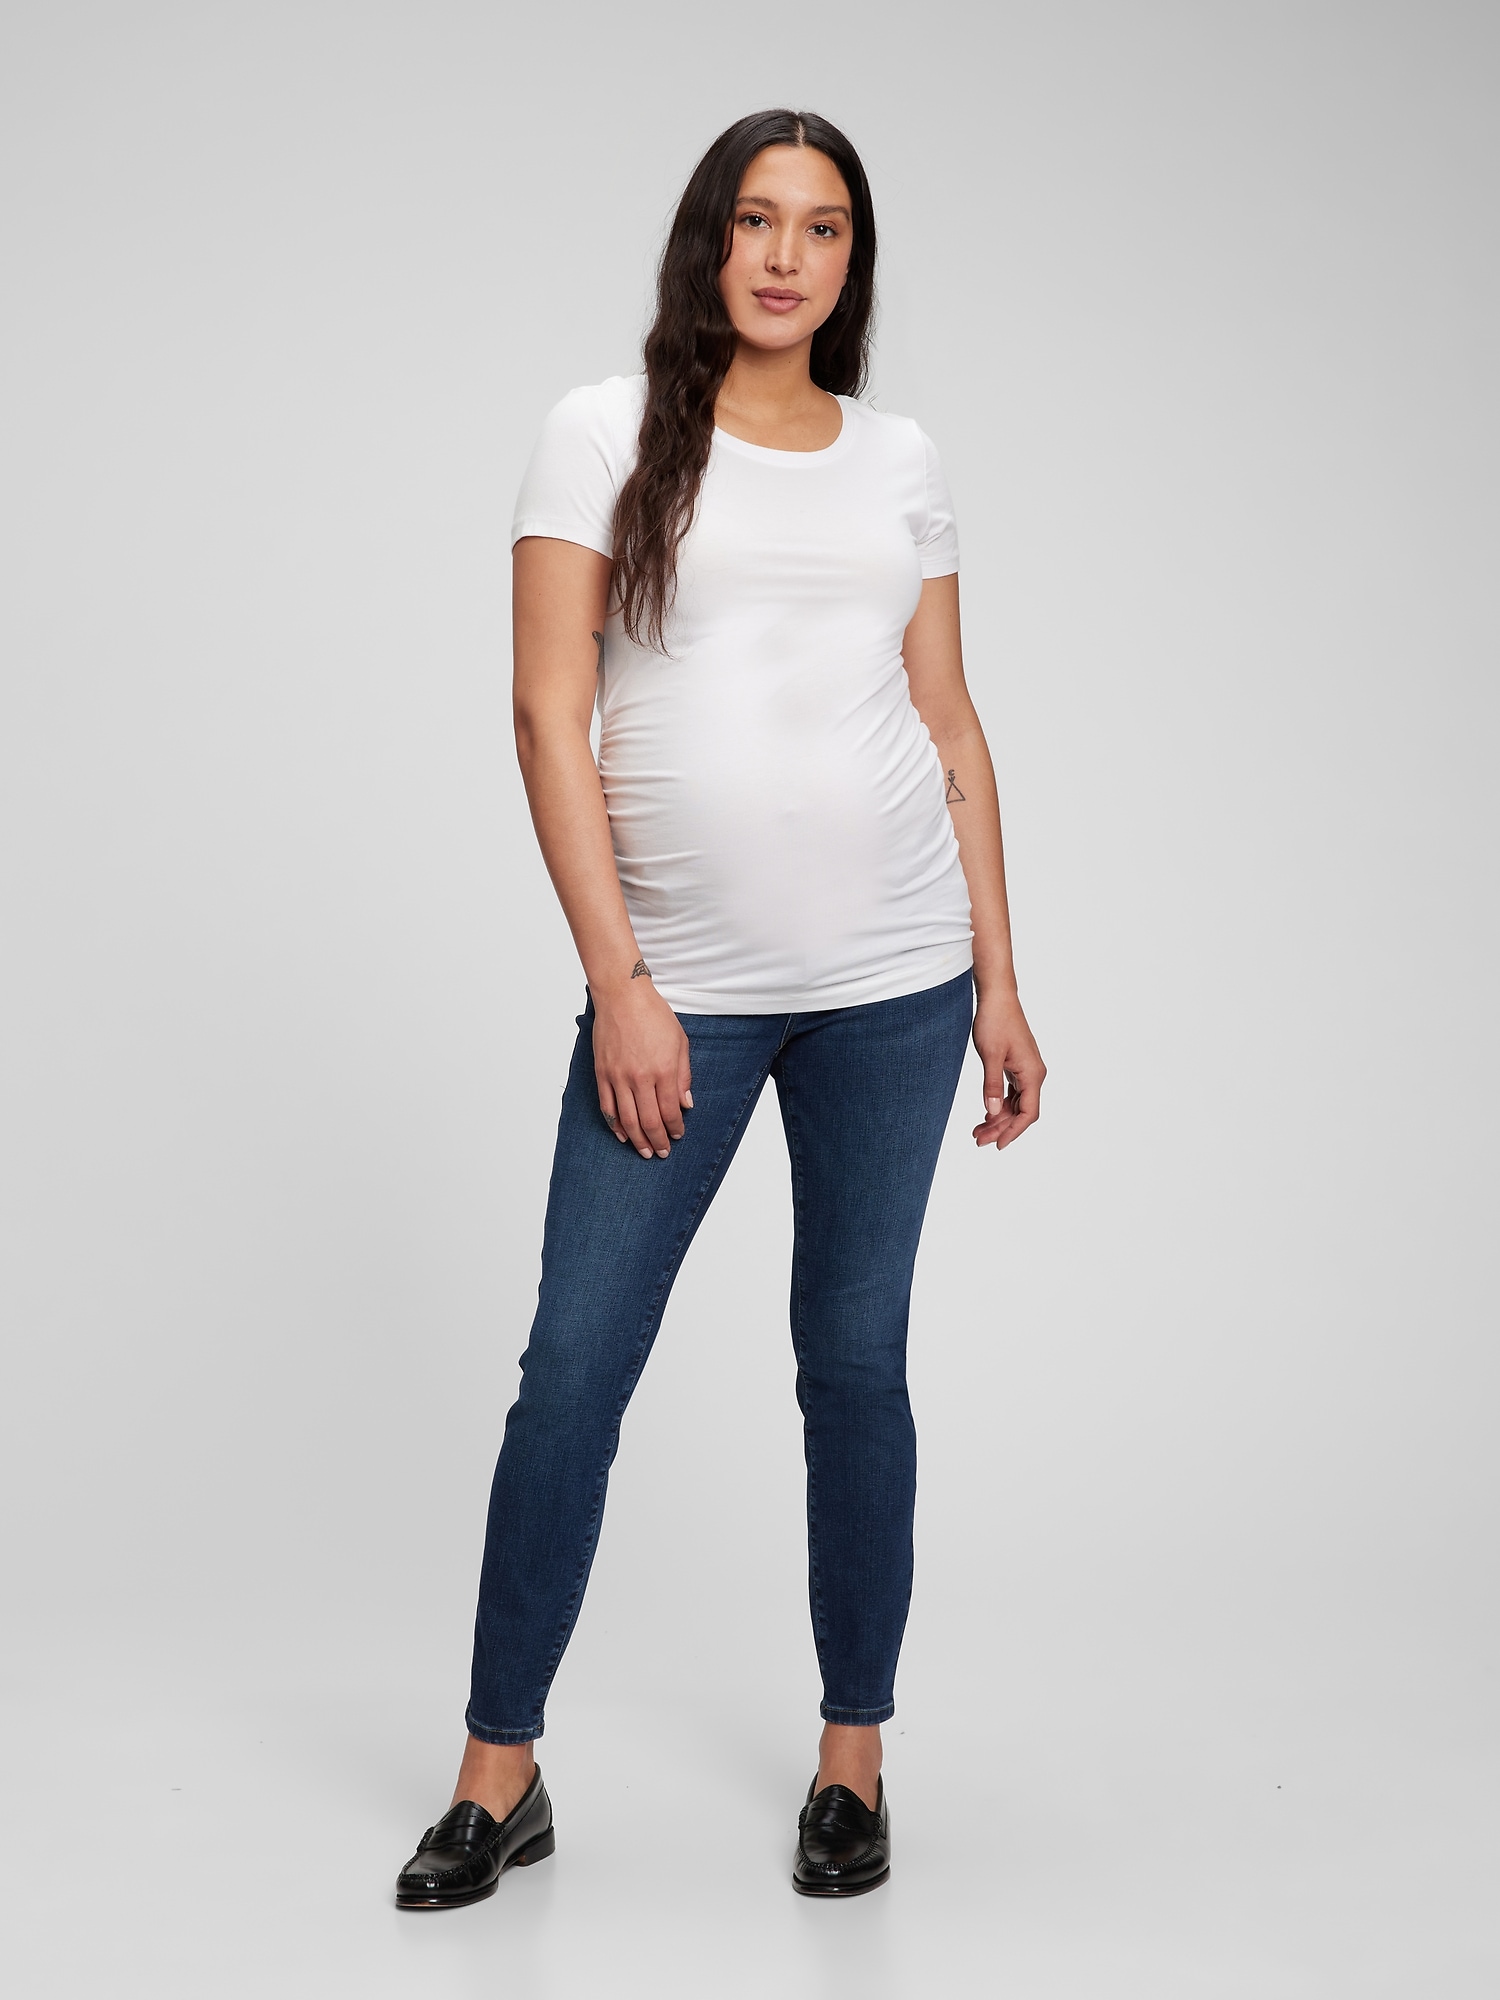 Gap Maternity Inset Panel Skinny Jeans with Washwell